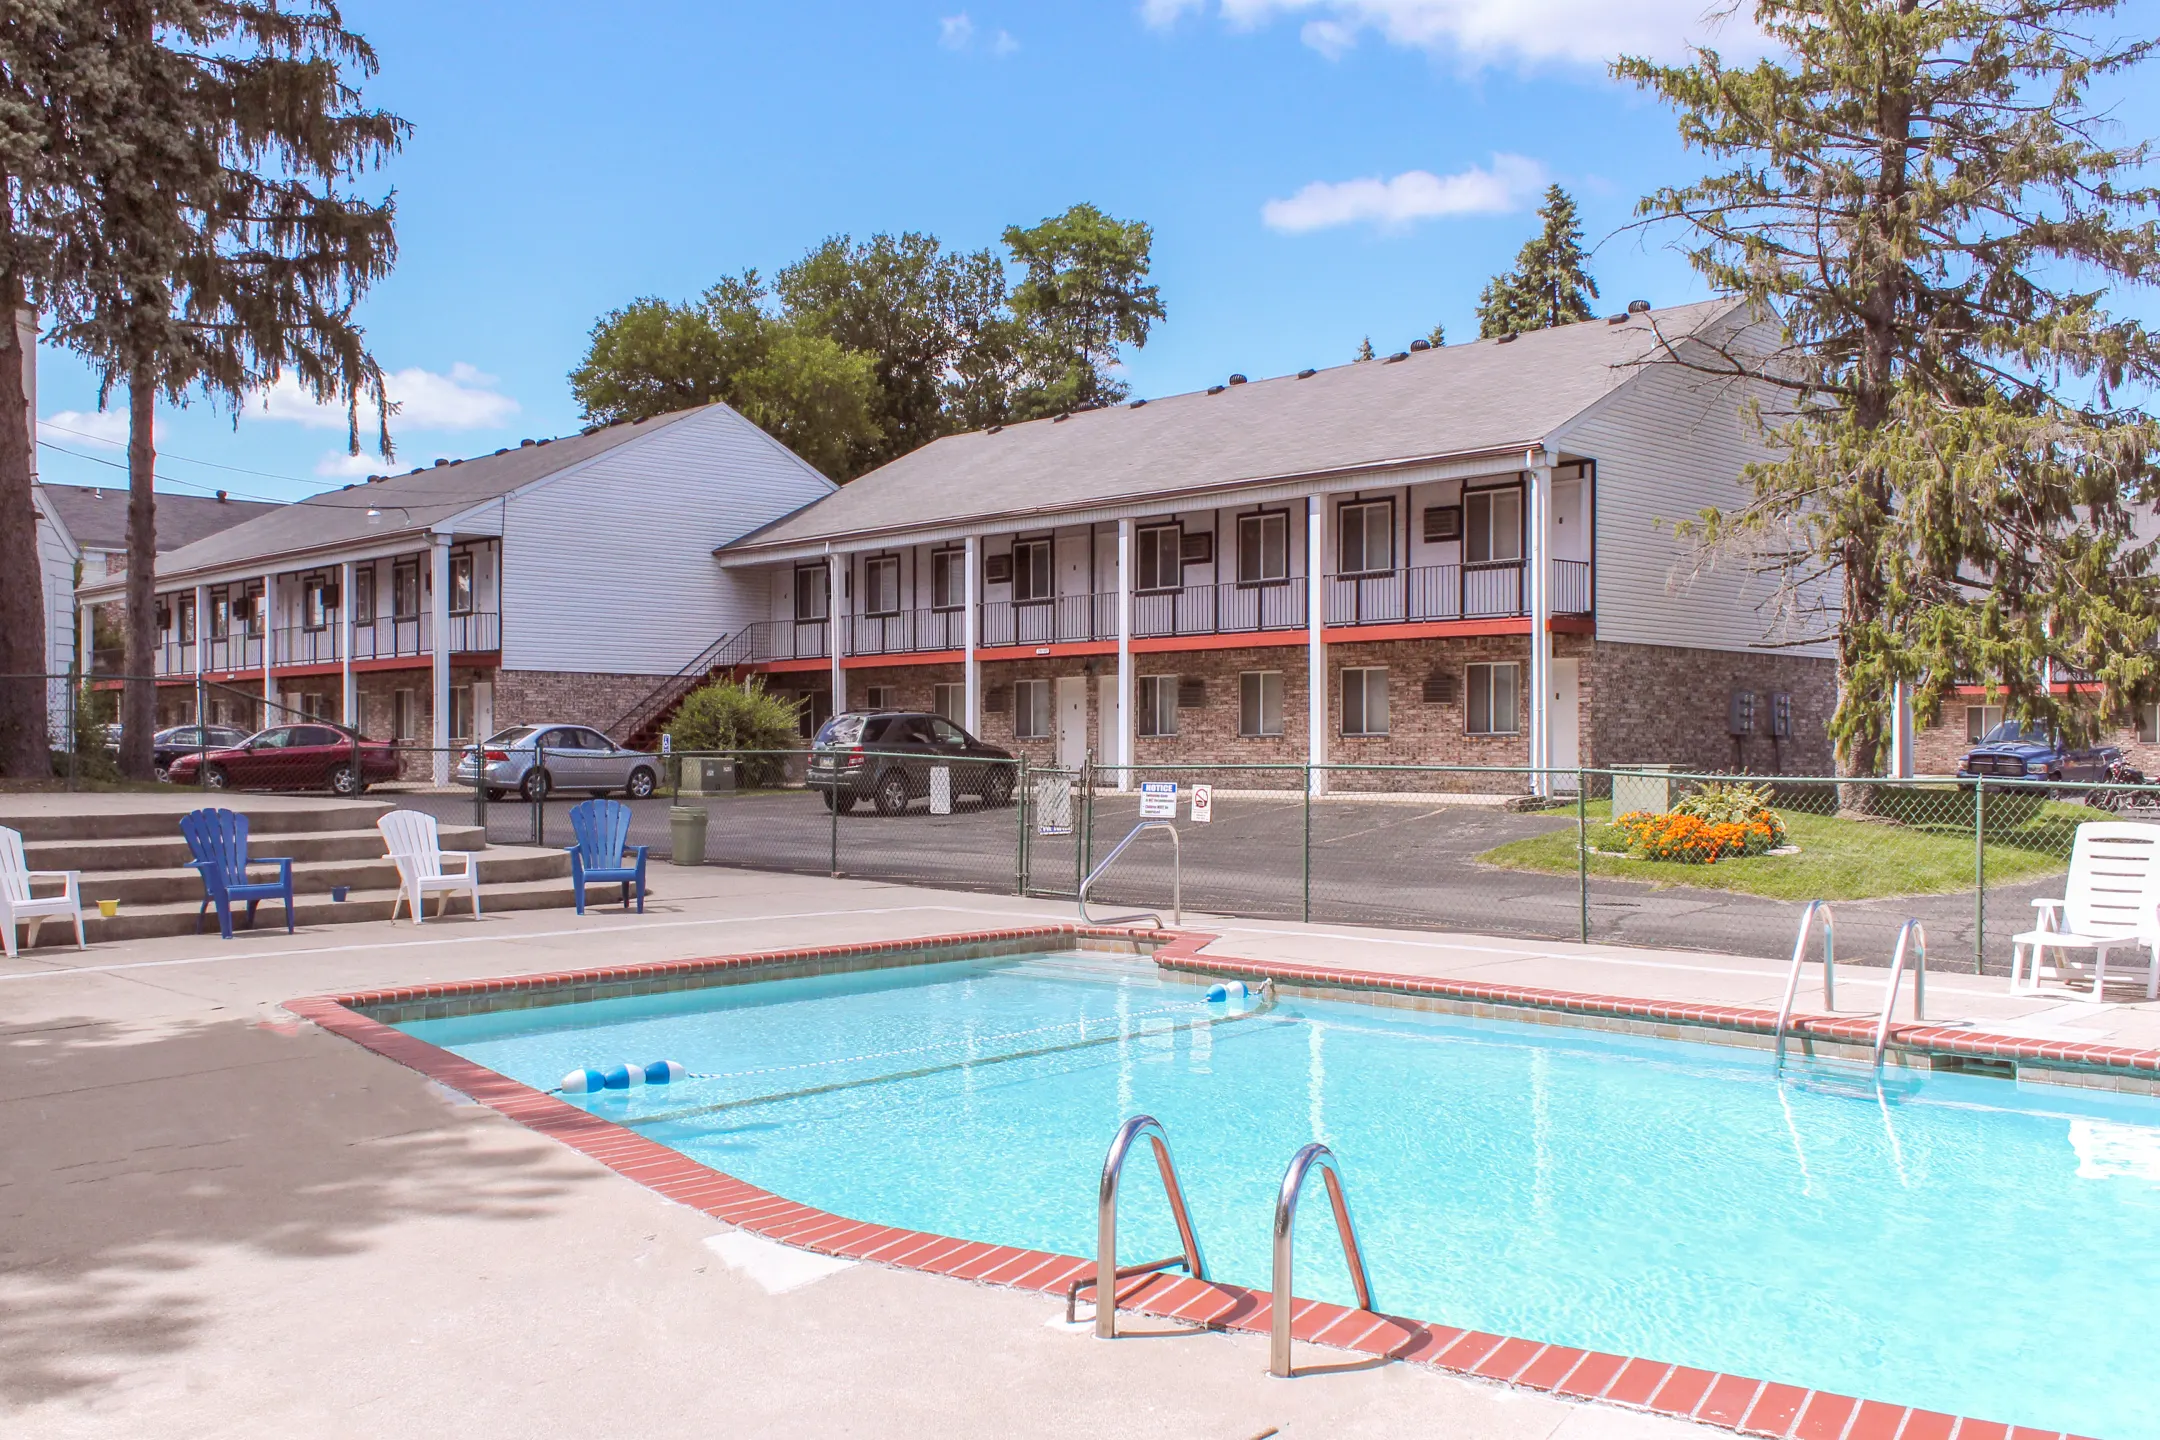 Pool - Oak Hill Apartments - Maumee, OH